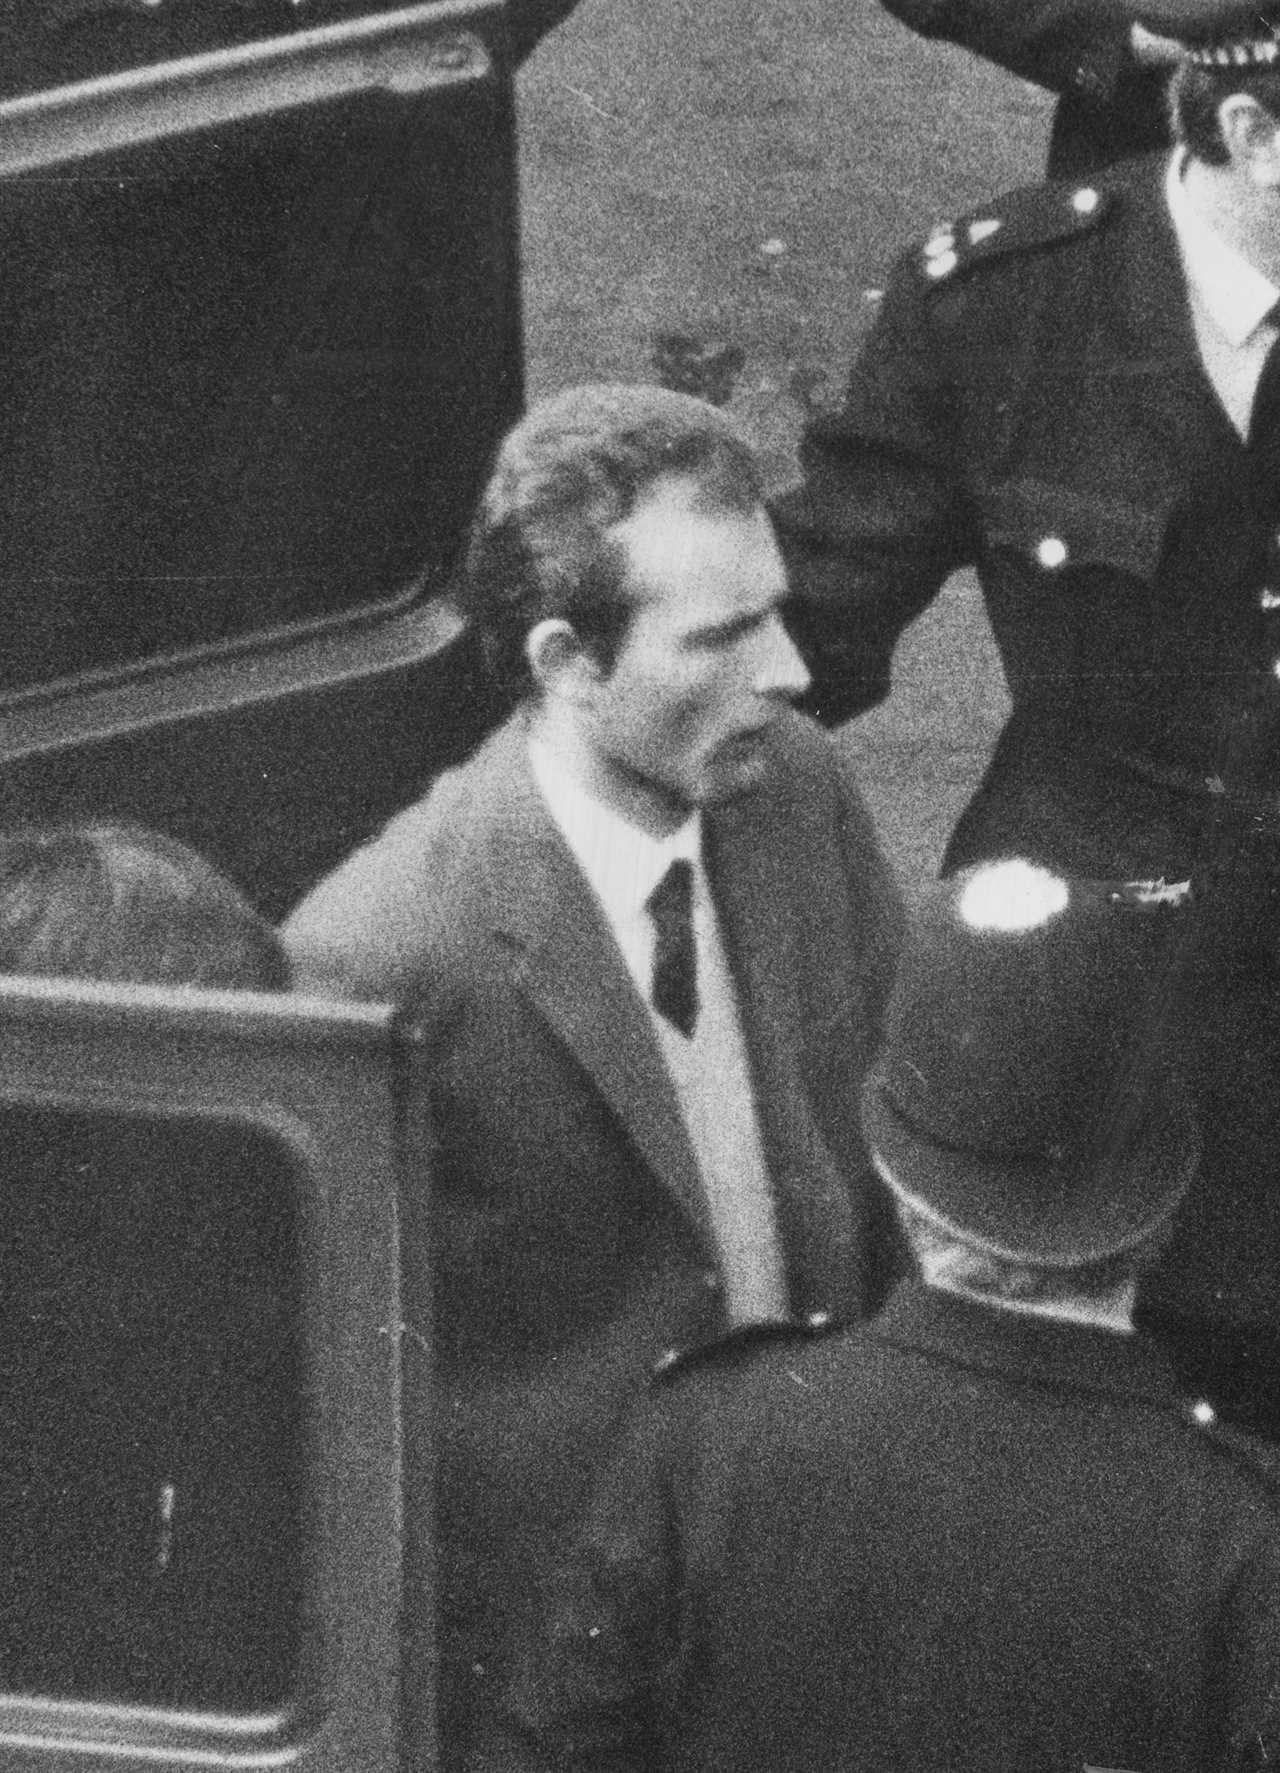 Princess Anne kidnap attempt – what happened to the young royal in 1974?